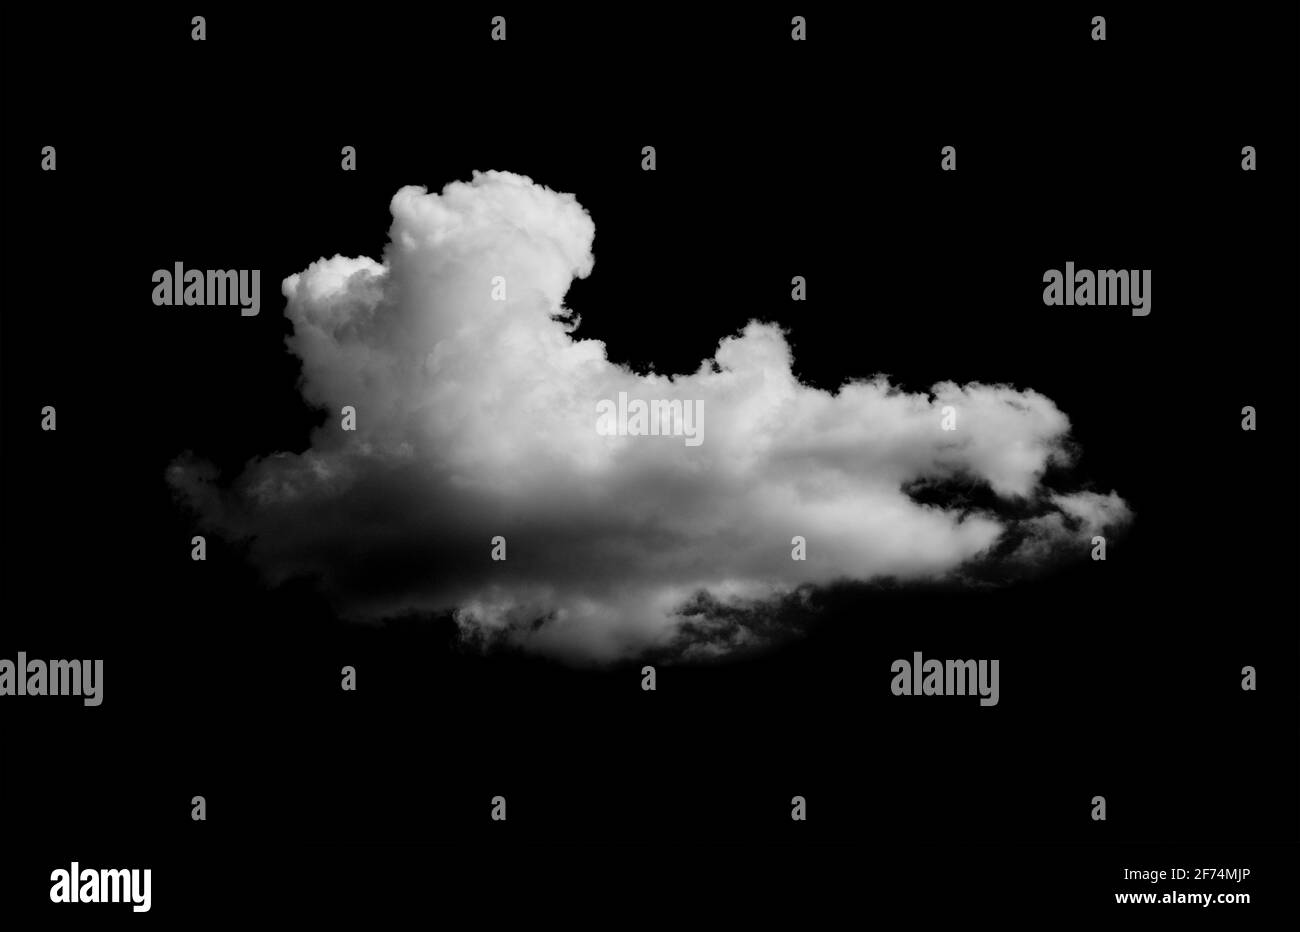 Clouds on black background Stock Photo